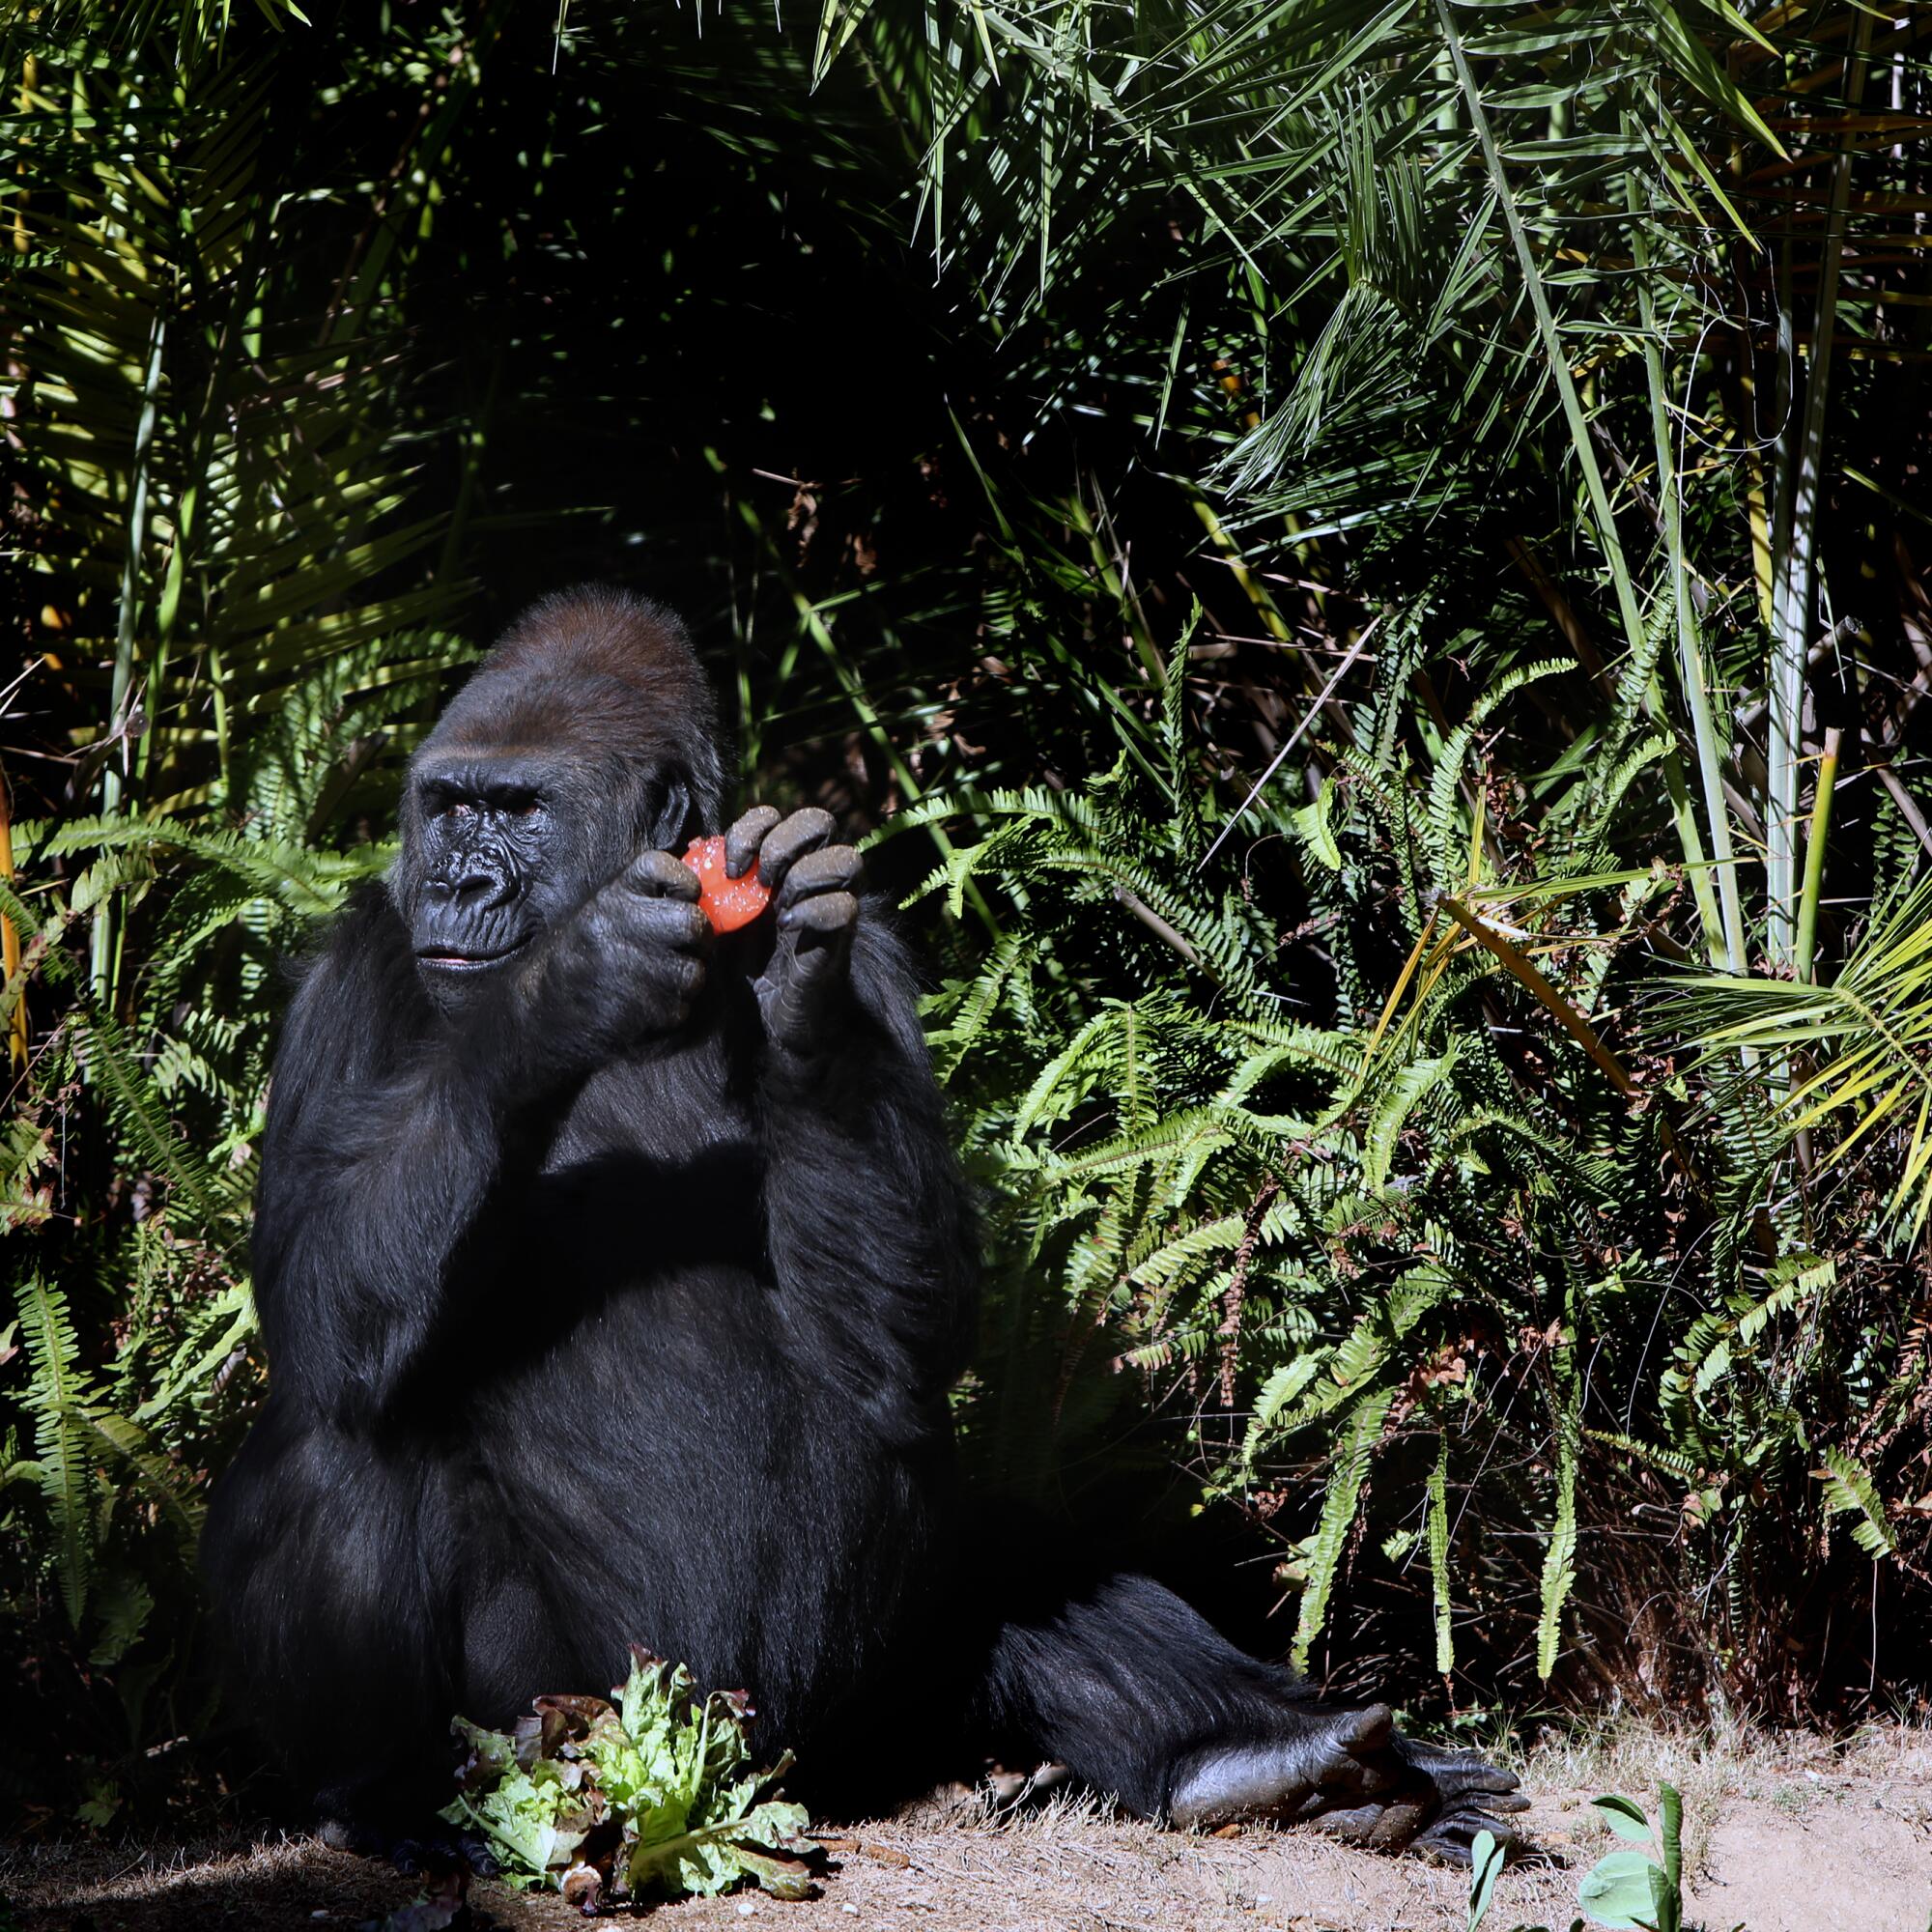 N'djia eats an ice treat in the Western Lowland Gorilla exhibit at the L.A. Zoo.